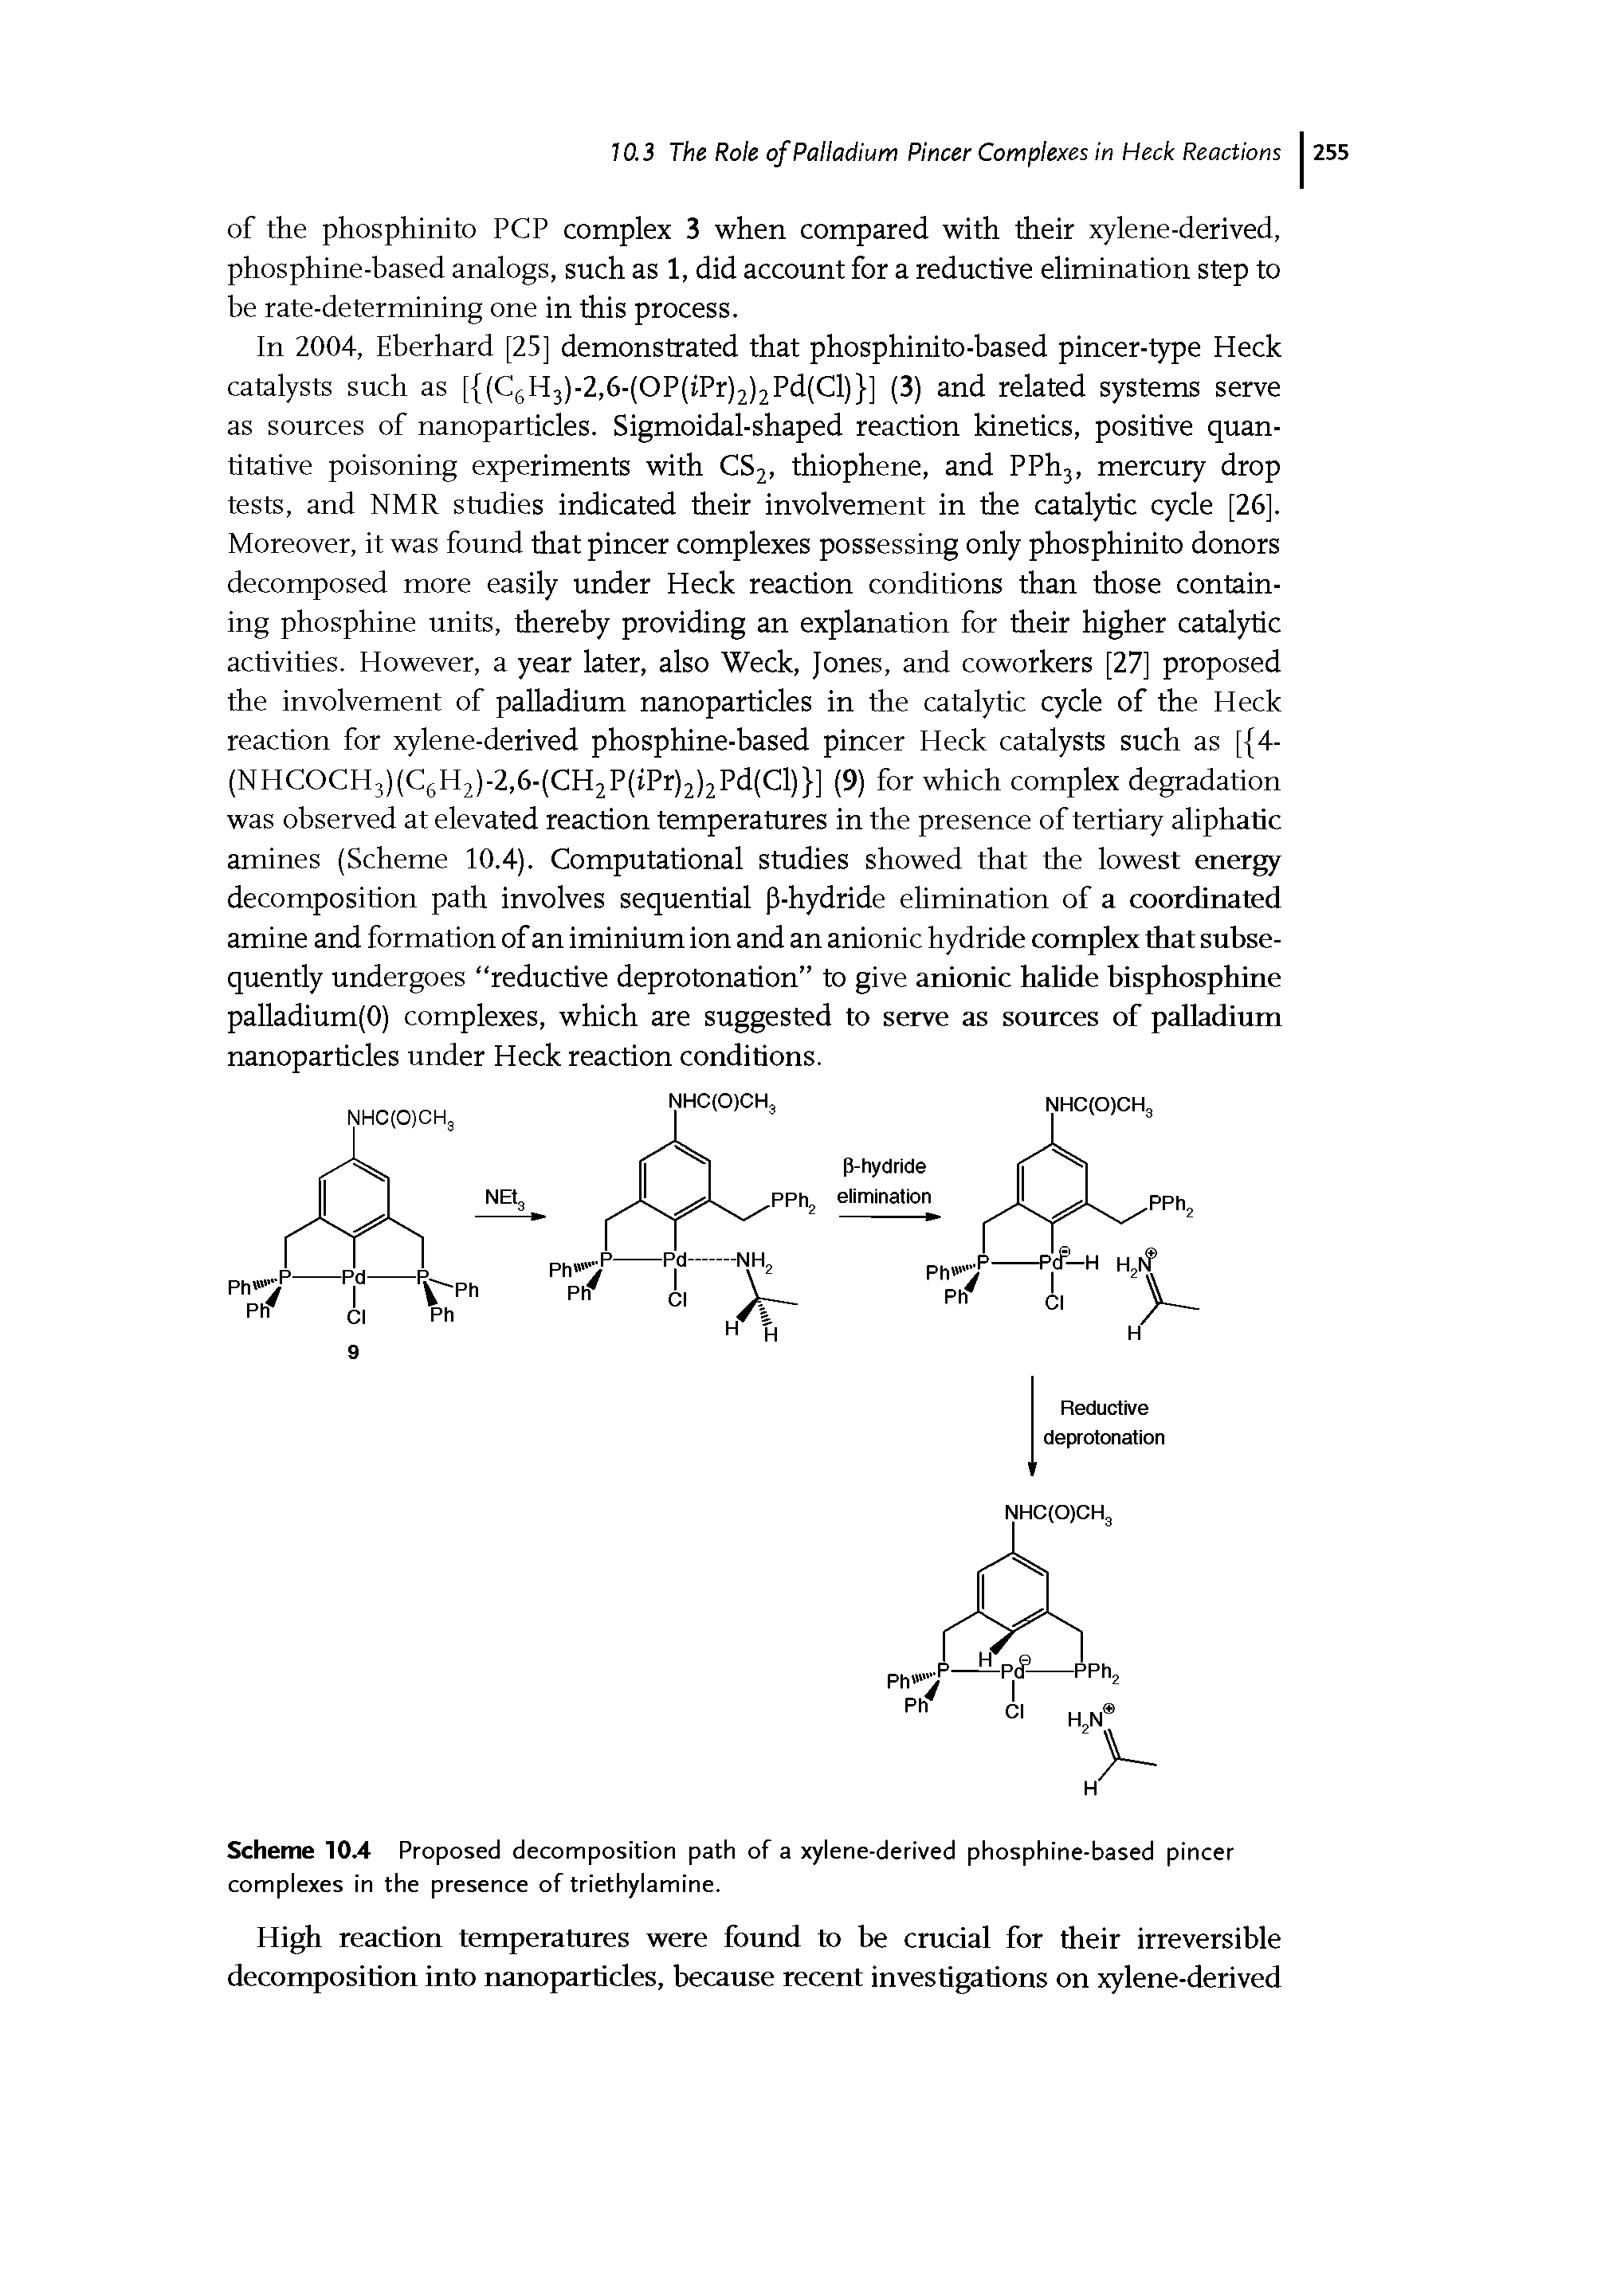 Scheme 10.4 Proposed decomposition path of a xylene-derived phosphine-based pincer complexes in the presence of triethylamine.